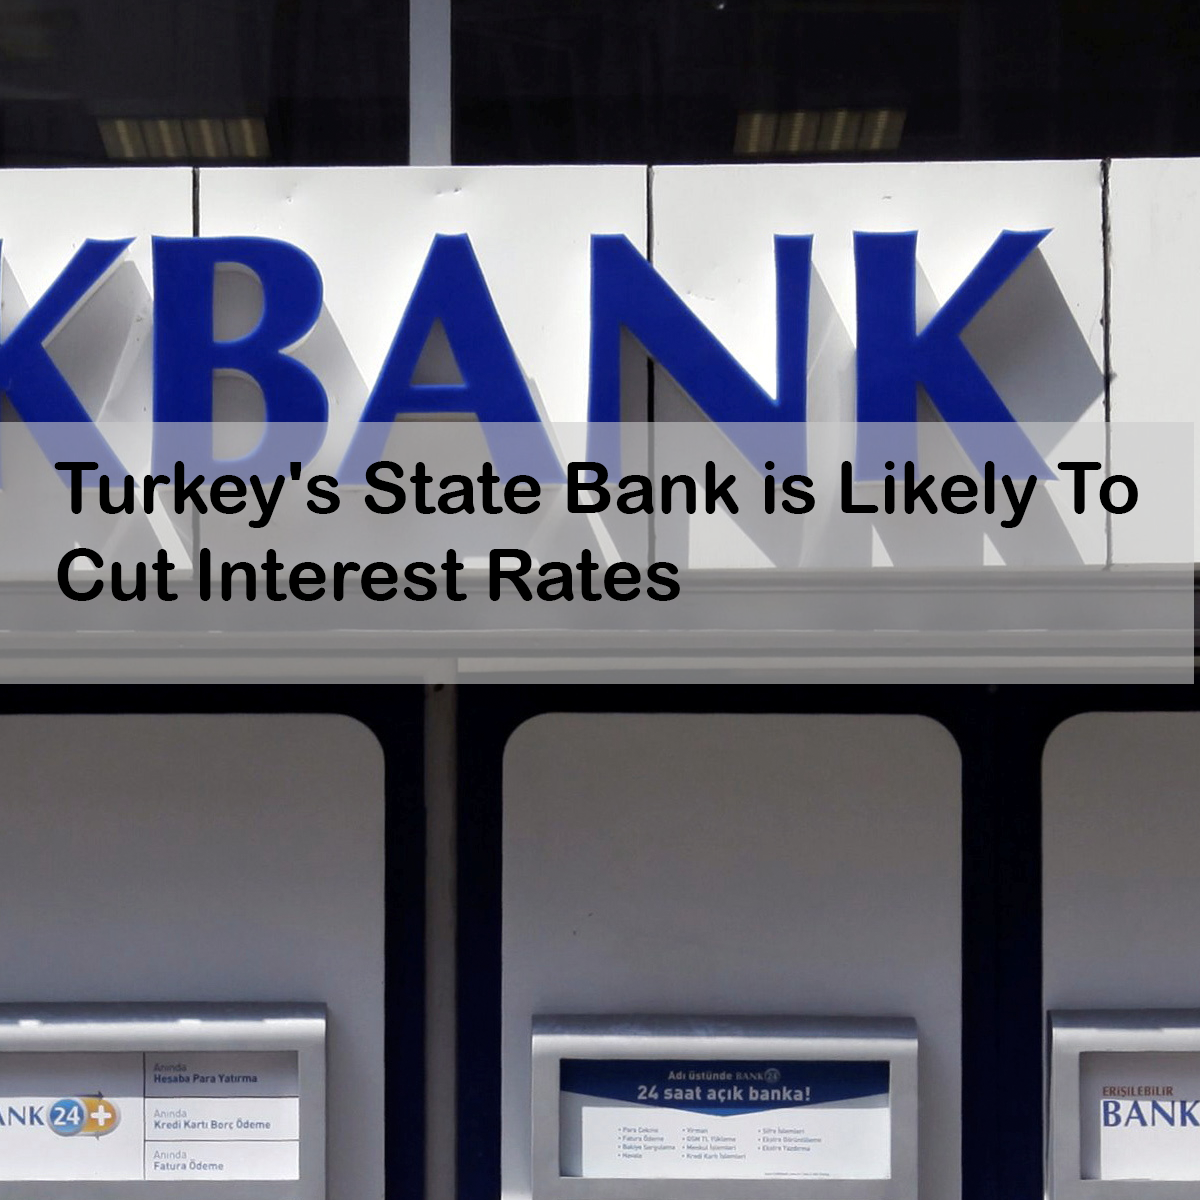 Turkey's State Bank is Likely To Cut Interest Rates